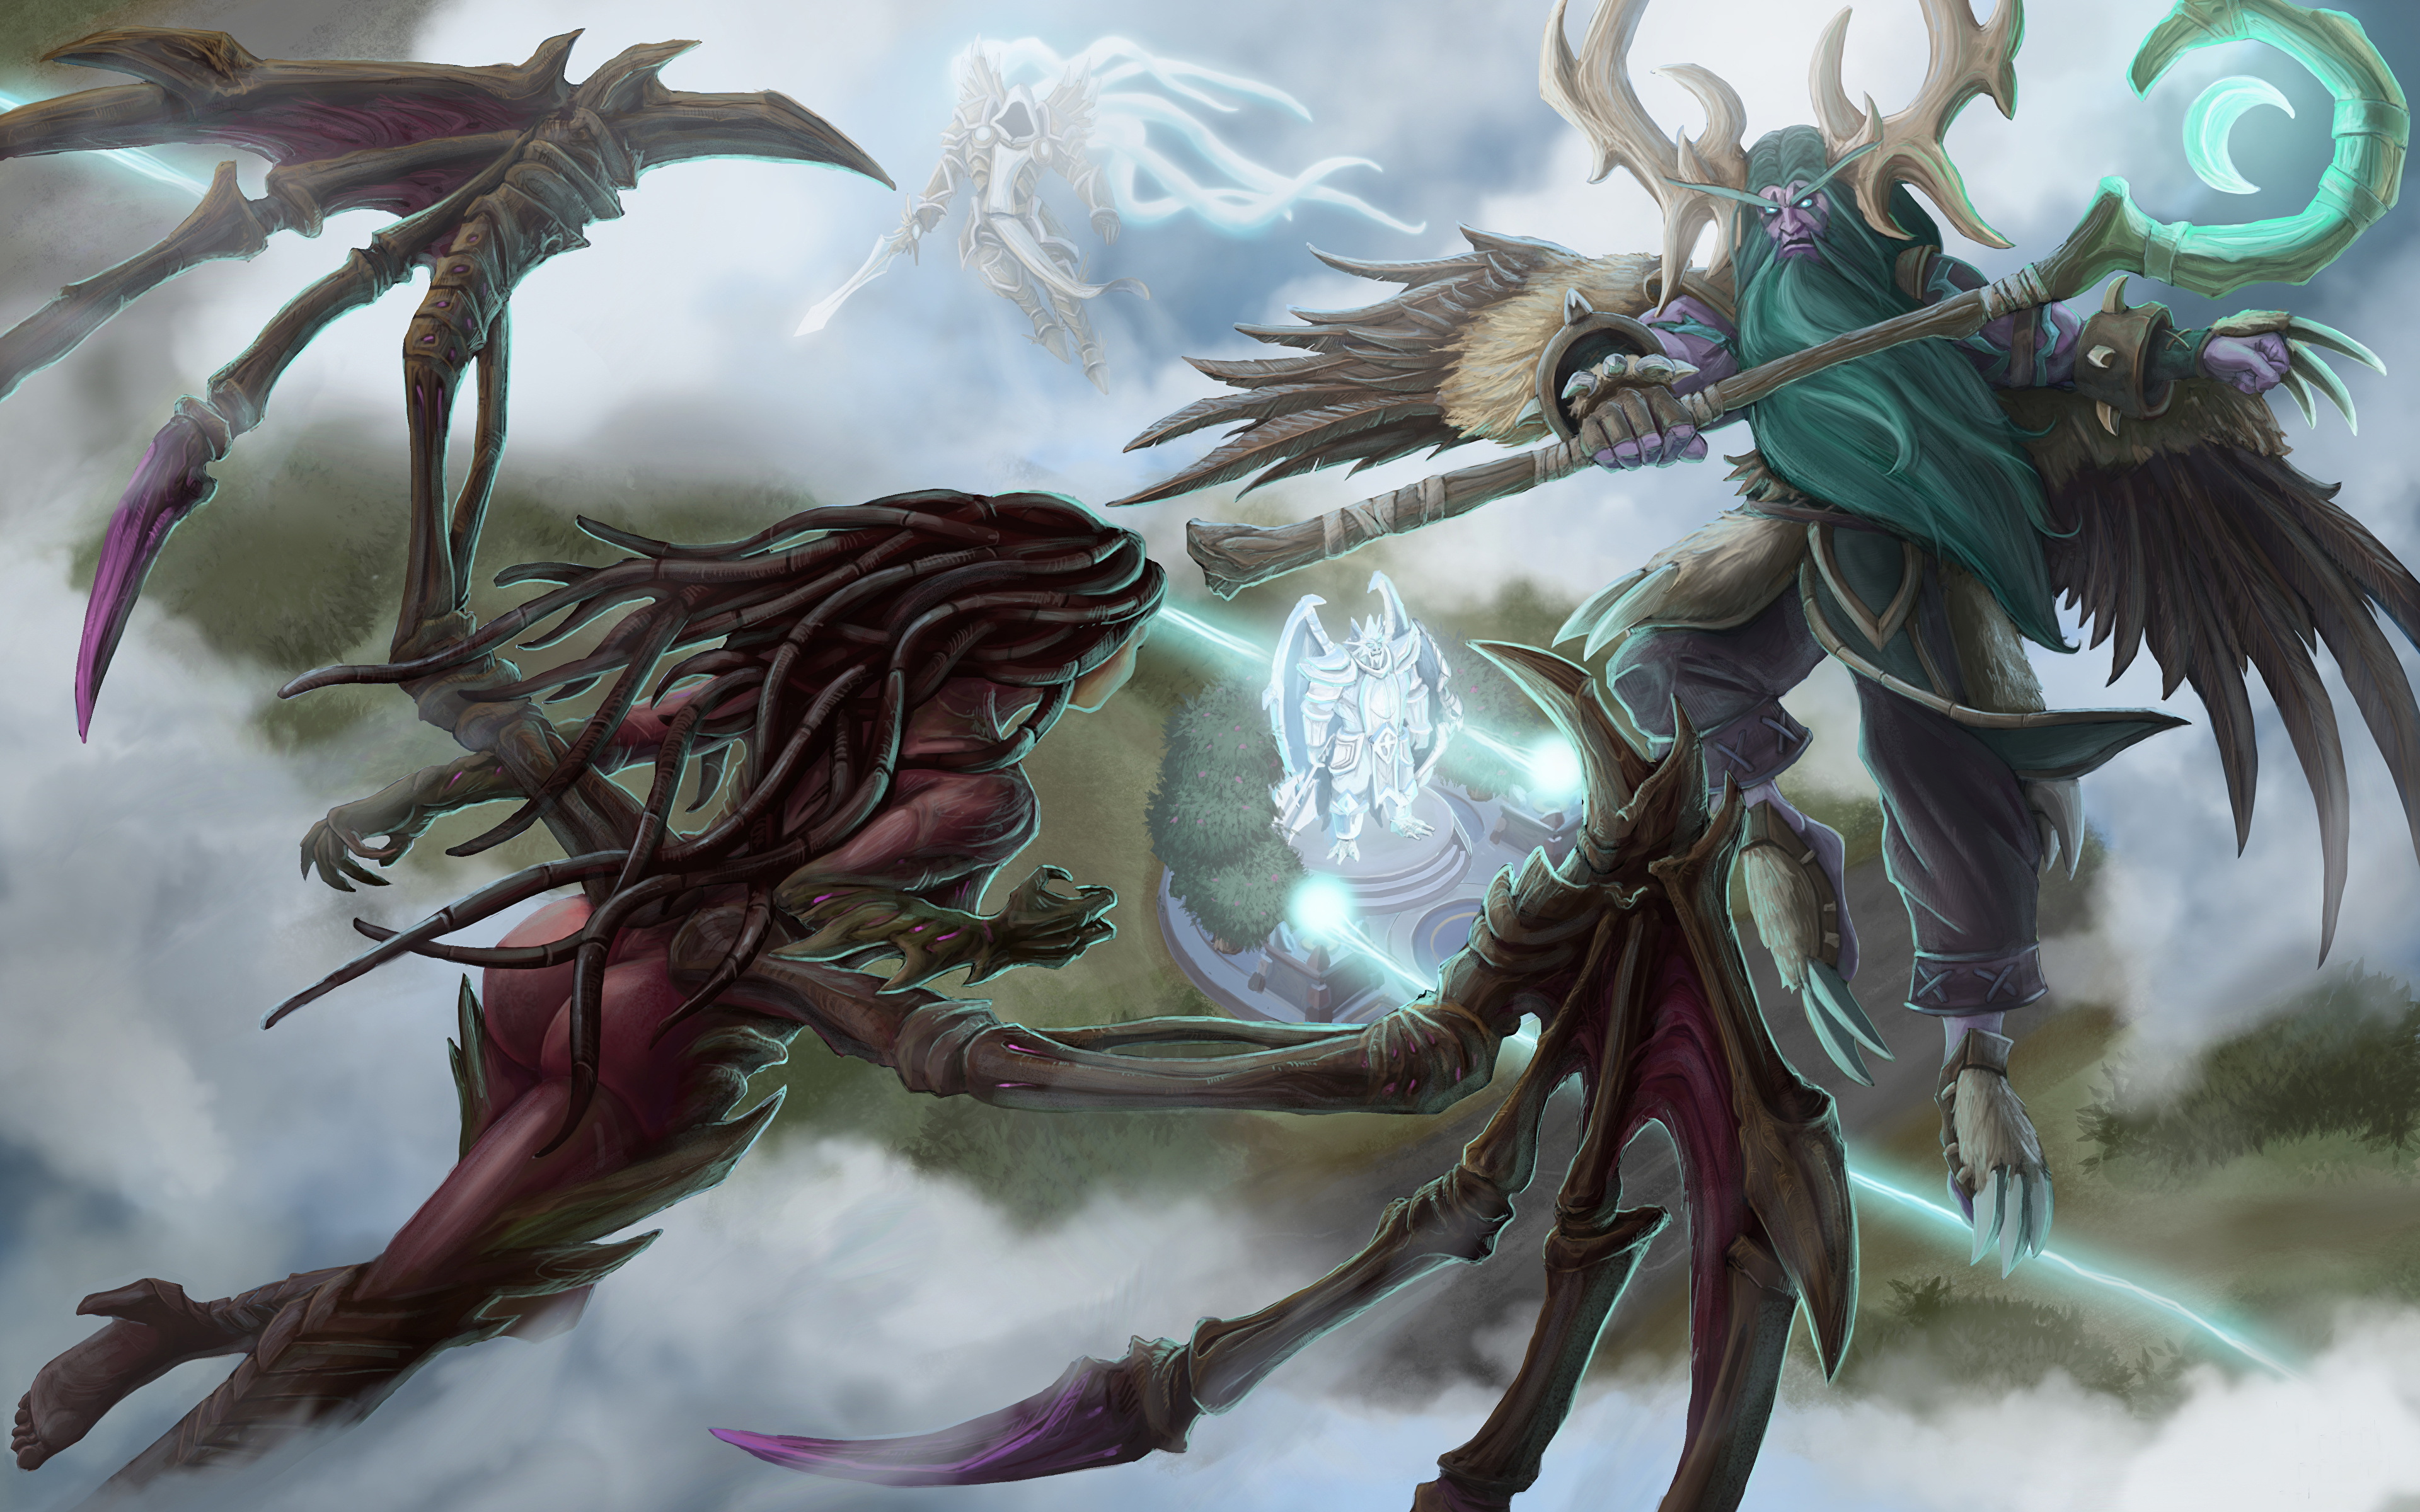 3840x2400、Heroes of the Storm、サラ・ケリガン、Archangel of Justice, Malfurion, Tyrael、翼、��ンピュータゲーム、ゲーム、ファンタジー、